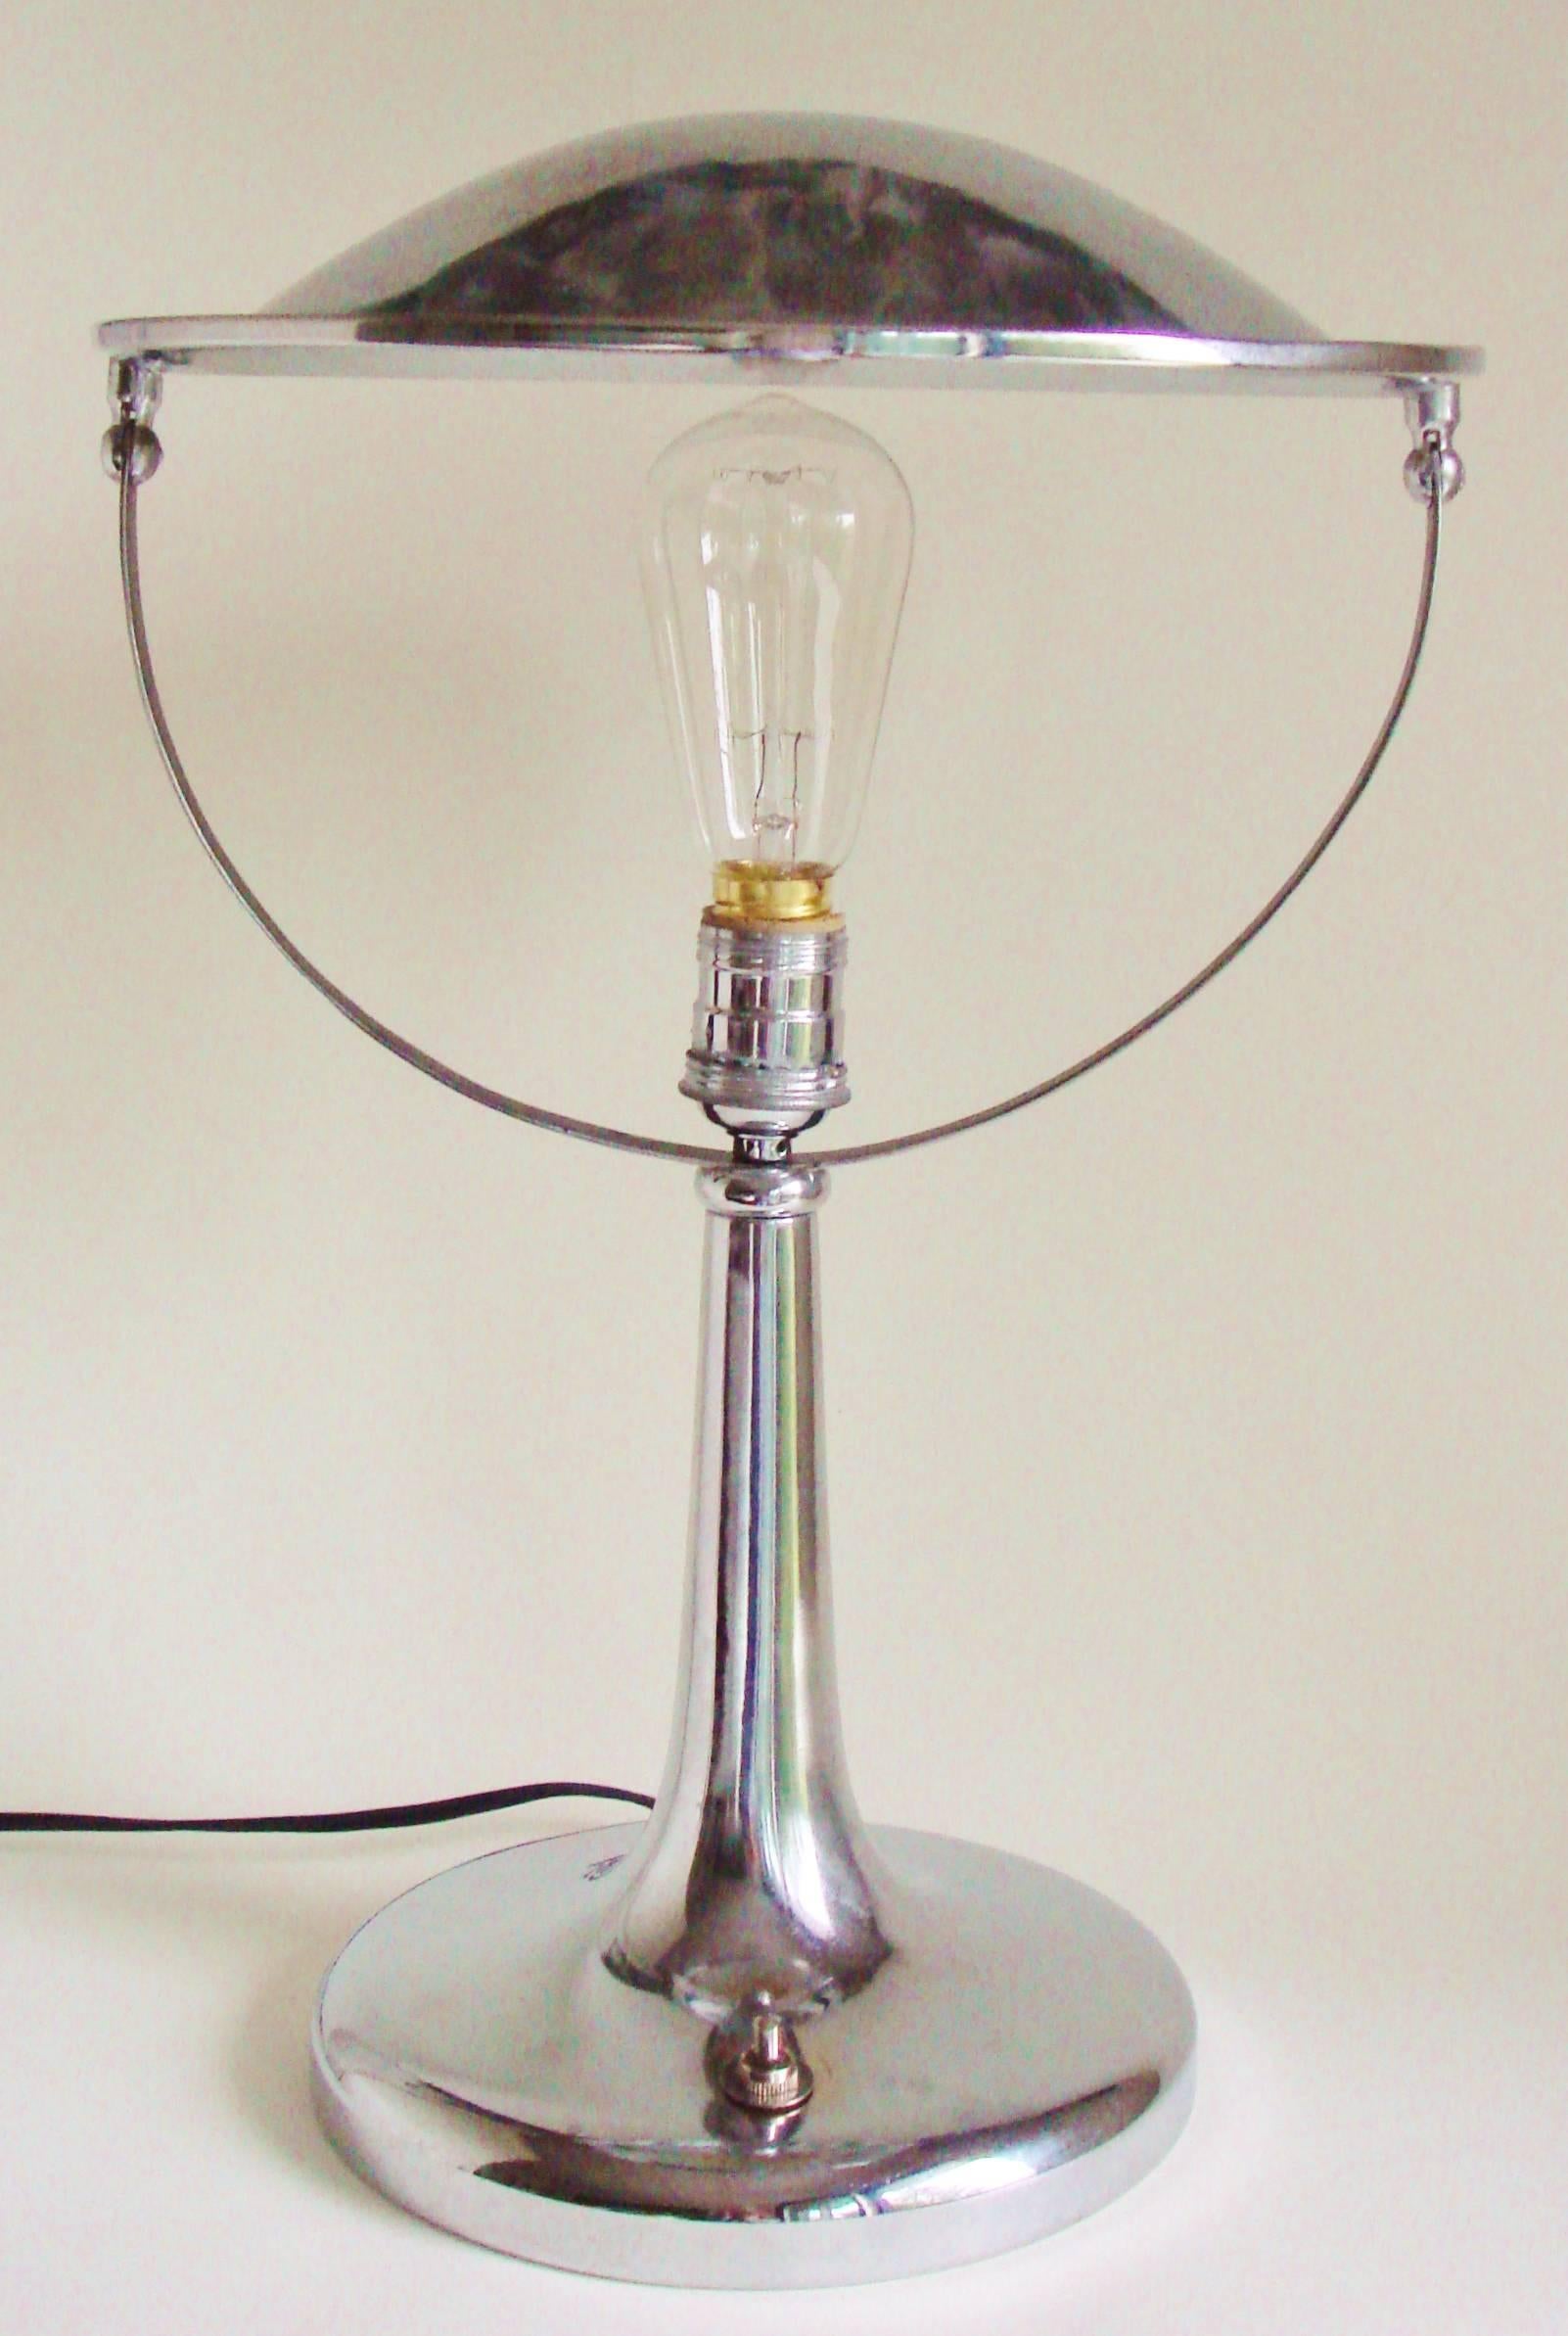 This intriguingly designed adjustable shade desk or table lamp was manufactured in the years post World War II by the Italian electrical company, Zerowatt and its design is credited to Gardoncini. The chrome is in excellent condition and, at some